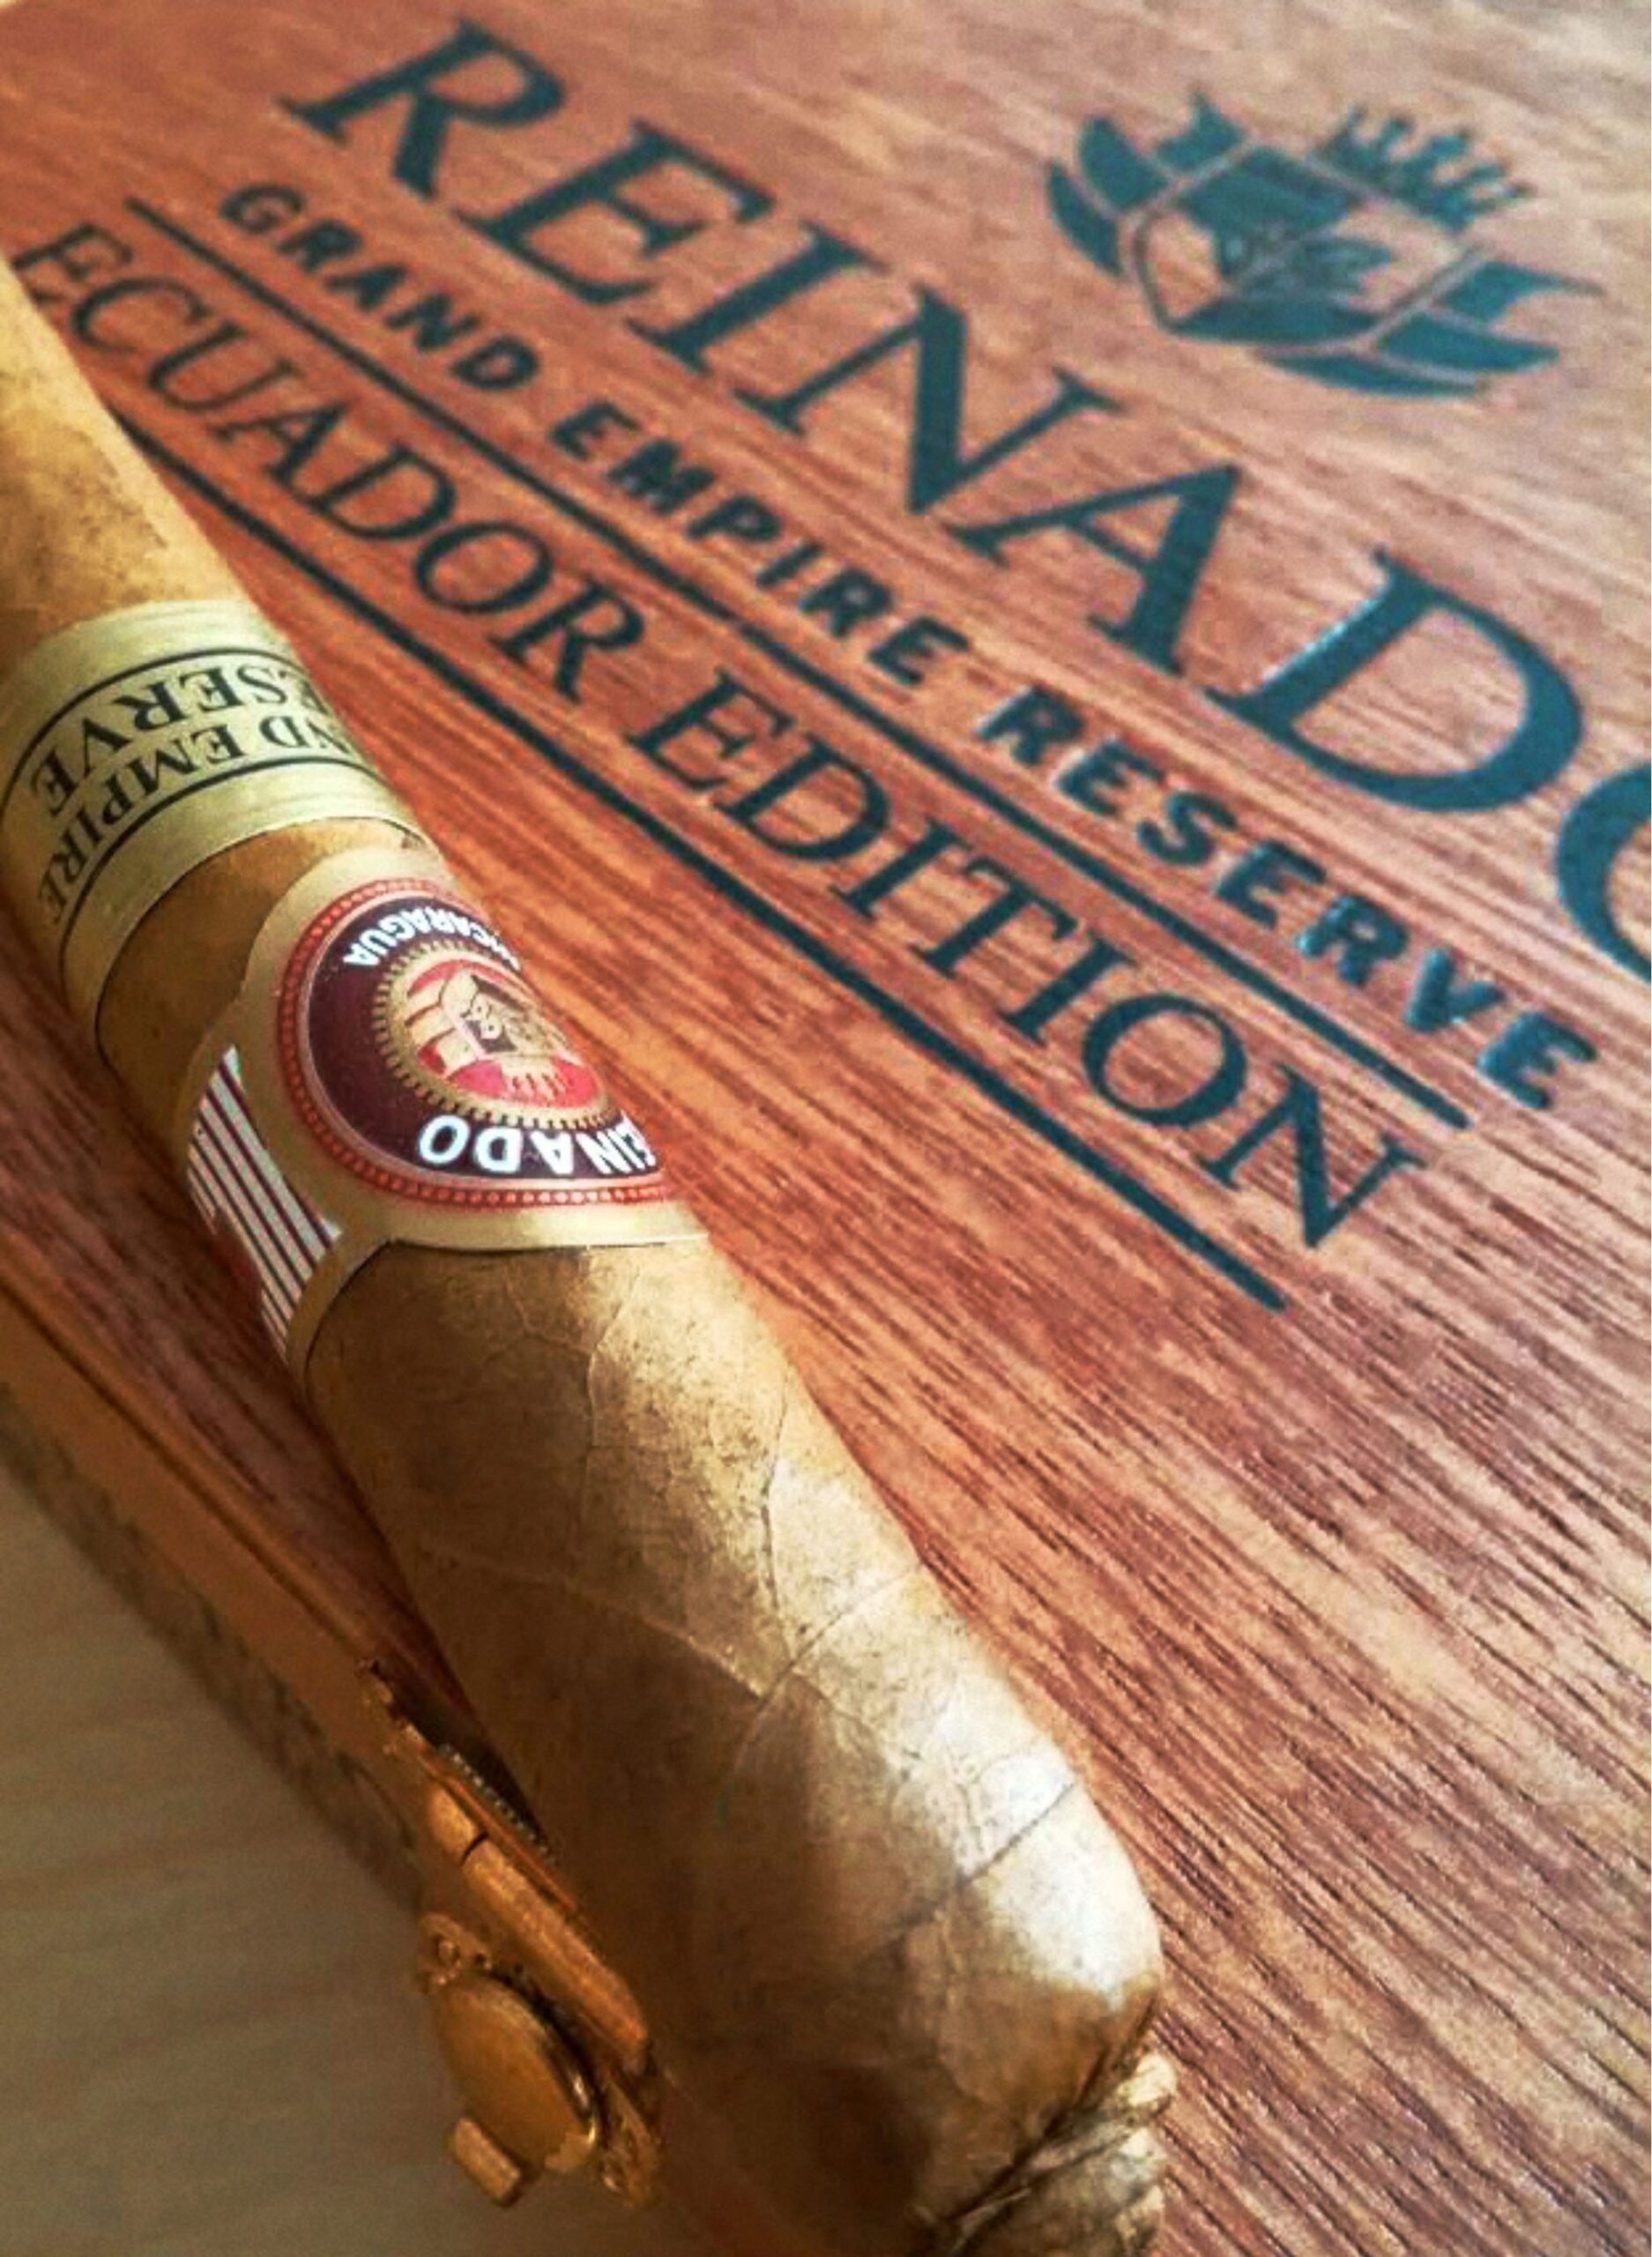 REINADO® Grand Empire Reserve Continues to Expand with the Introduction of an Aged Ecuadorian Connecticut Wrapped Petit Lancero